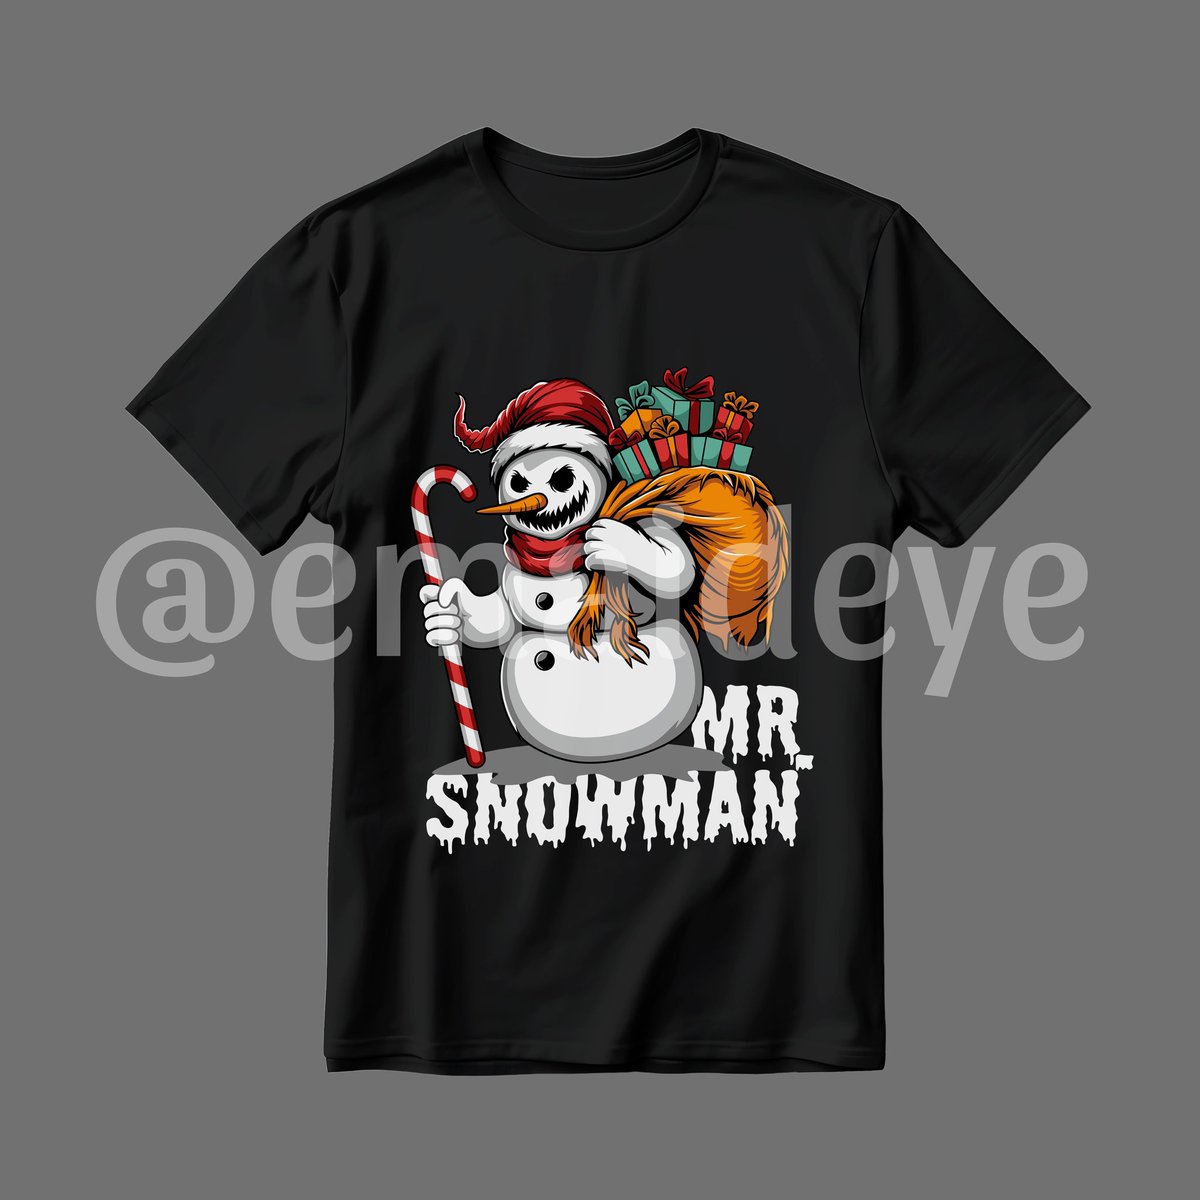 'Mr. Snowman'

Available design✅
Exclusive one buyer only
Available for change color and text

#design #designforsale #art #artwork #illustration #artworkforsale #artforsale #availabledesign #tshirtdesign #digitalart #merch #merchdesign #digitalillustration #christmasdesign